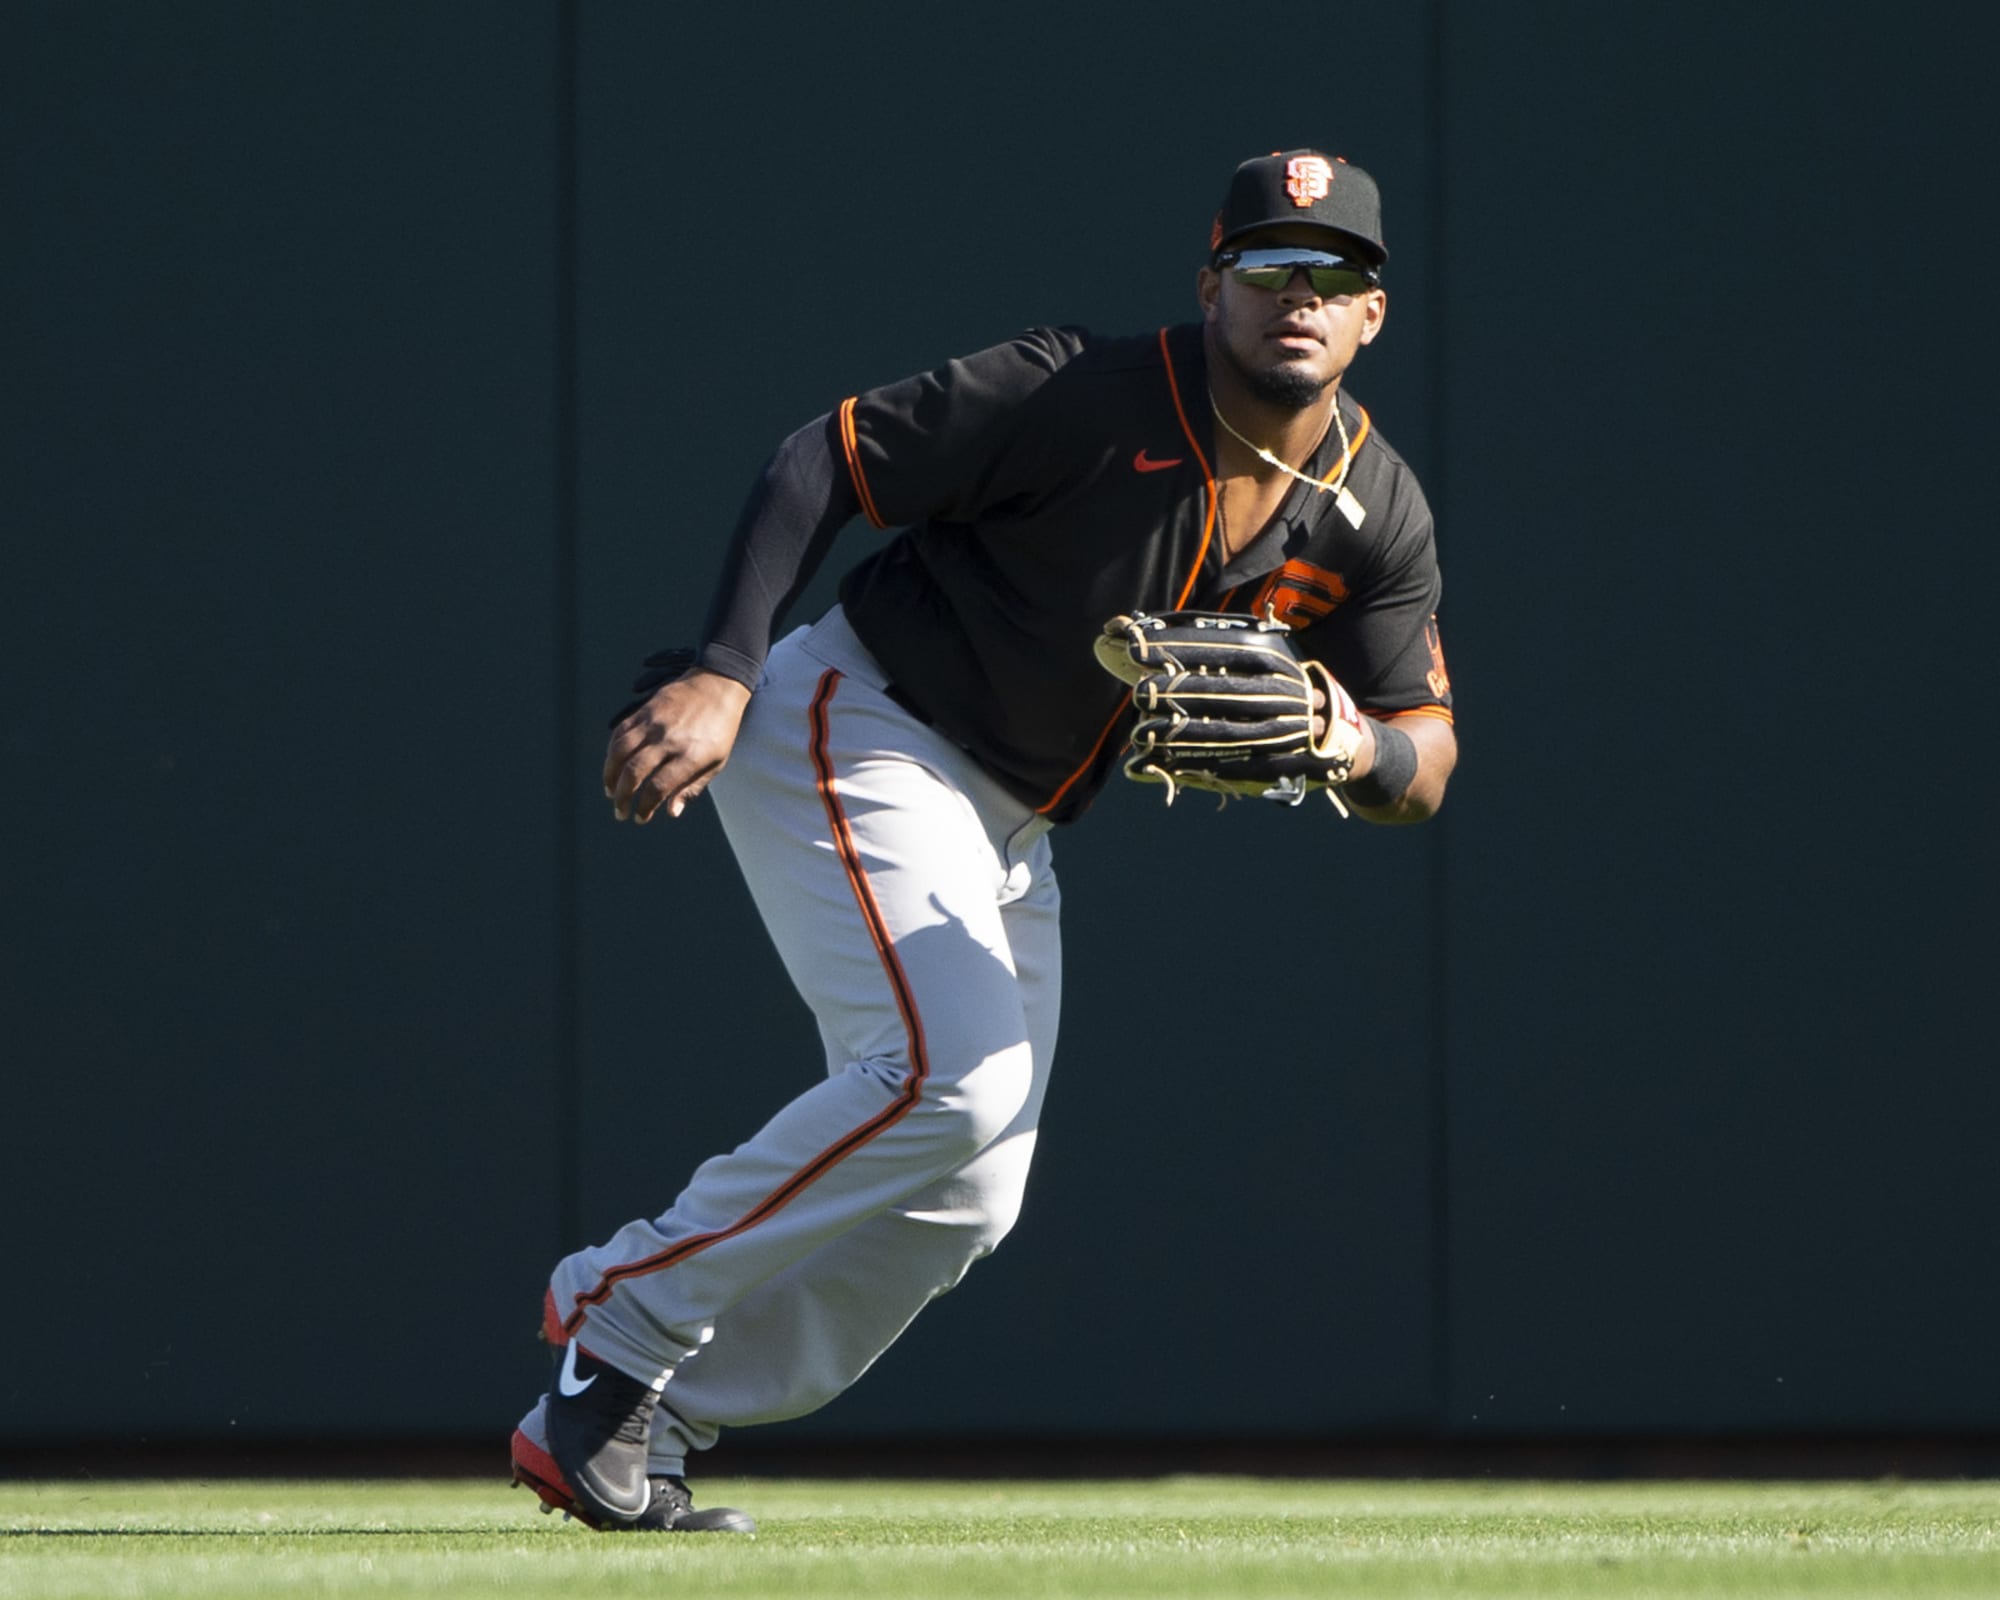 SF Giants: Joey Bart, Heliot Ramos, and others could see time in majors